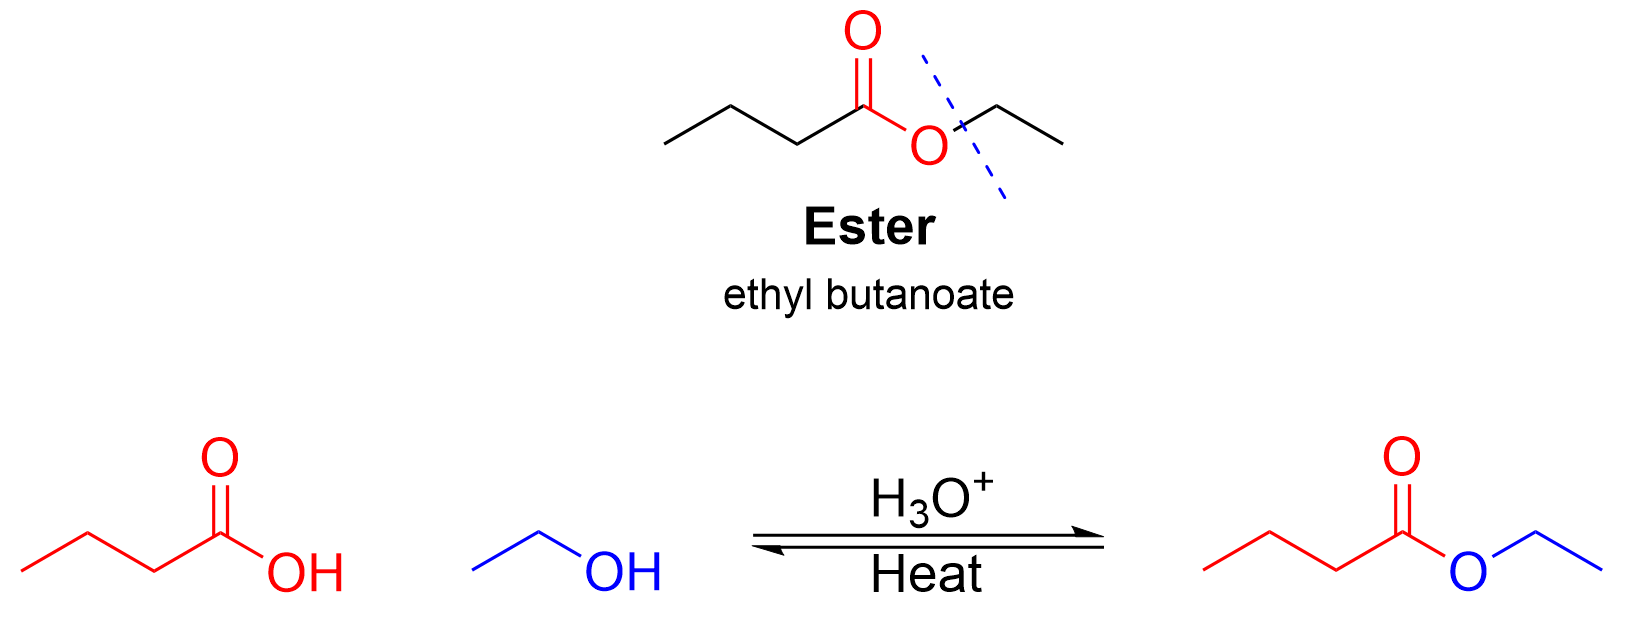 By using the same cutting method as in 3.6.e.ii, the regents needed in an acid-catalyzed reaction are determined to be butanoic acid and ethanol in the presence of H3O+ and heat to form ethyl butanoate.